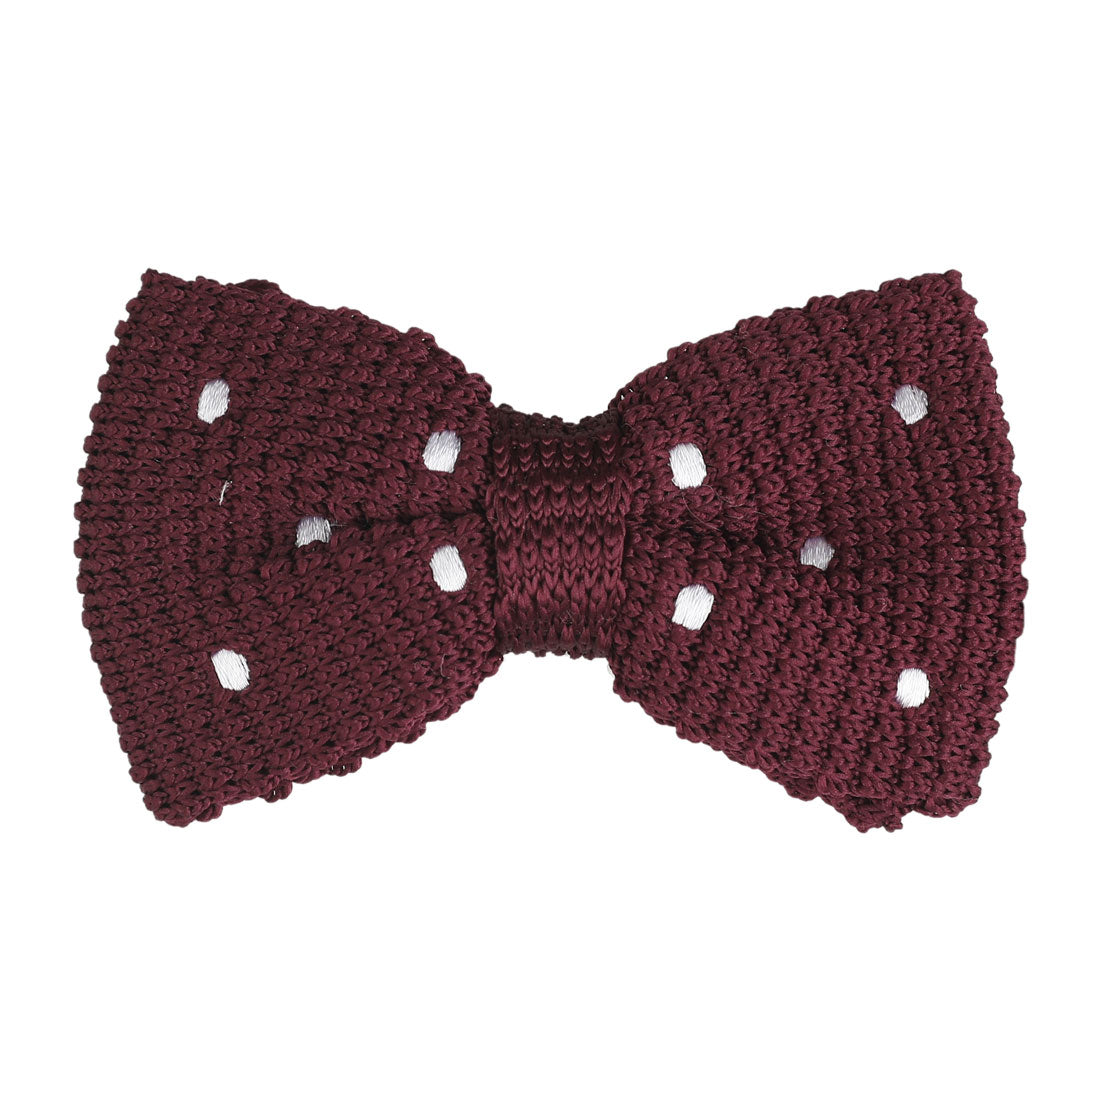 Allegra K Polka Dots Bow Ties Adjustable Strap Pre-tied Knitted Bowties